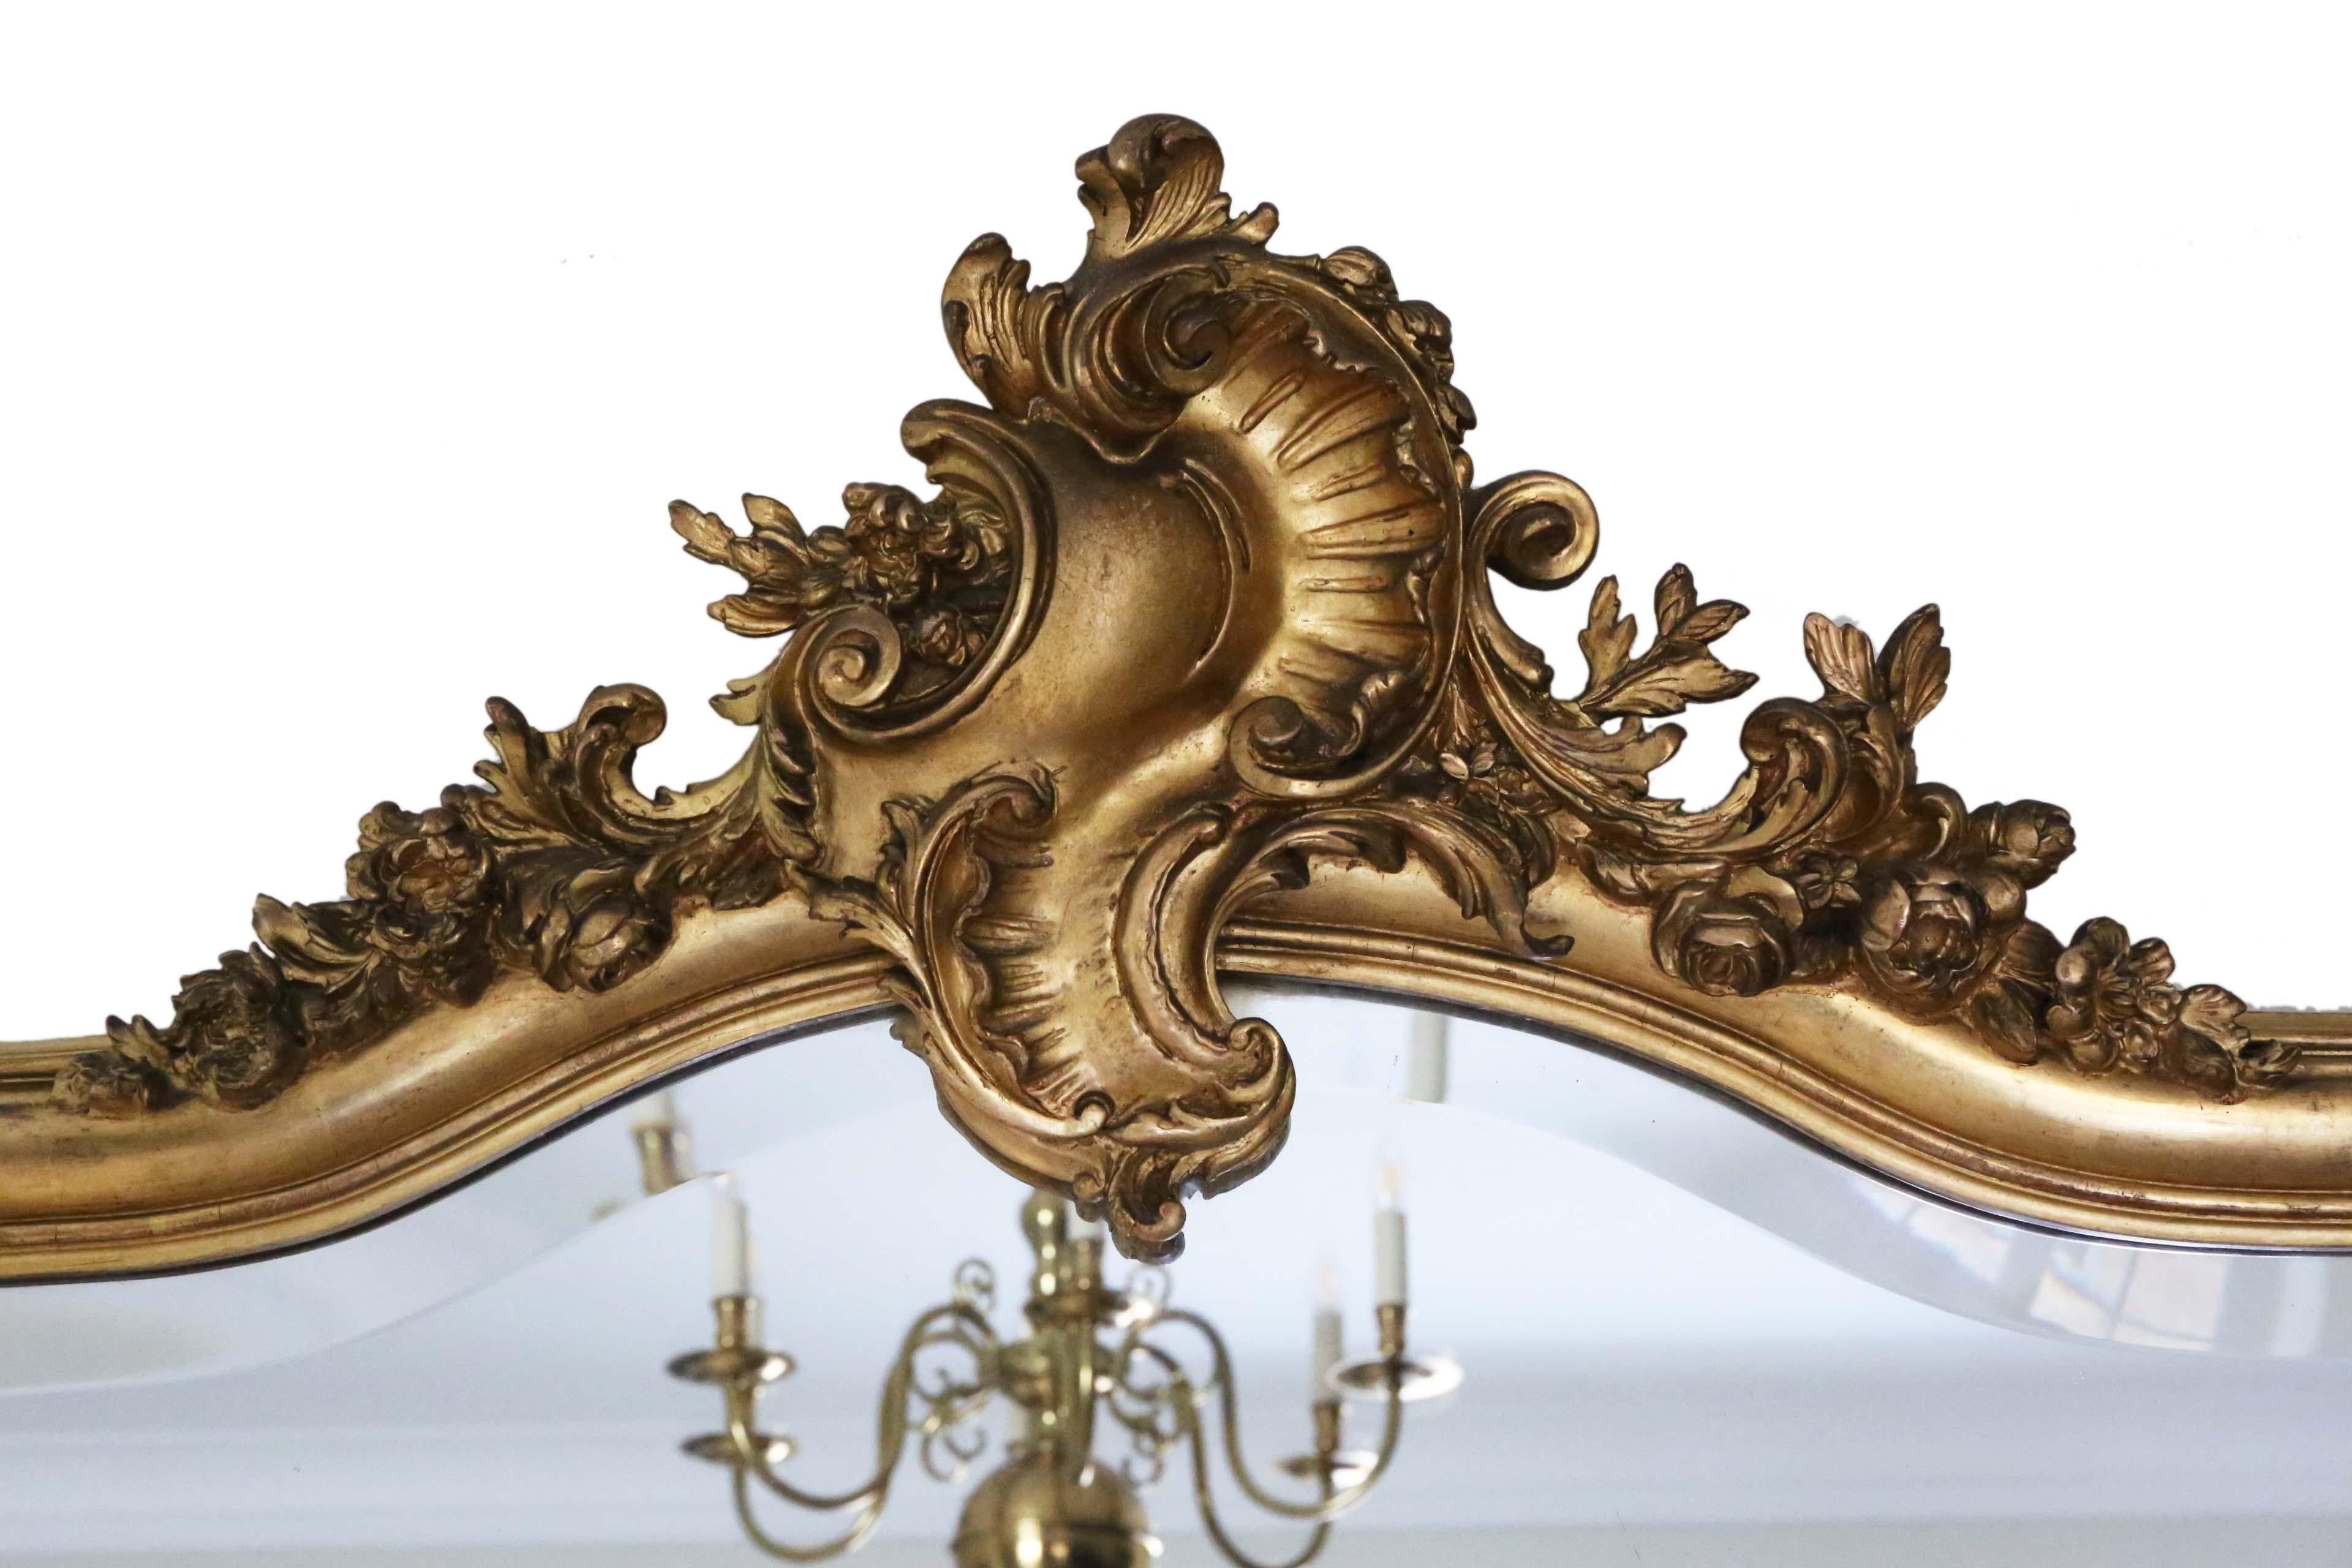 Late Victorian overmantle or wall mirror, circa 1900. Lovely charm and elegance.
This is a lovely, very rare mirror. Great frame in very good condition… looks great. The original gilding remains.
A breathtaking statement piece... the best that you